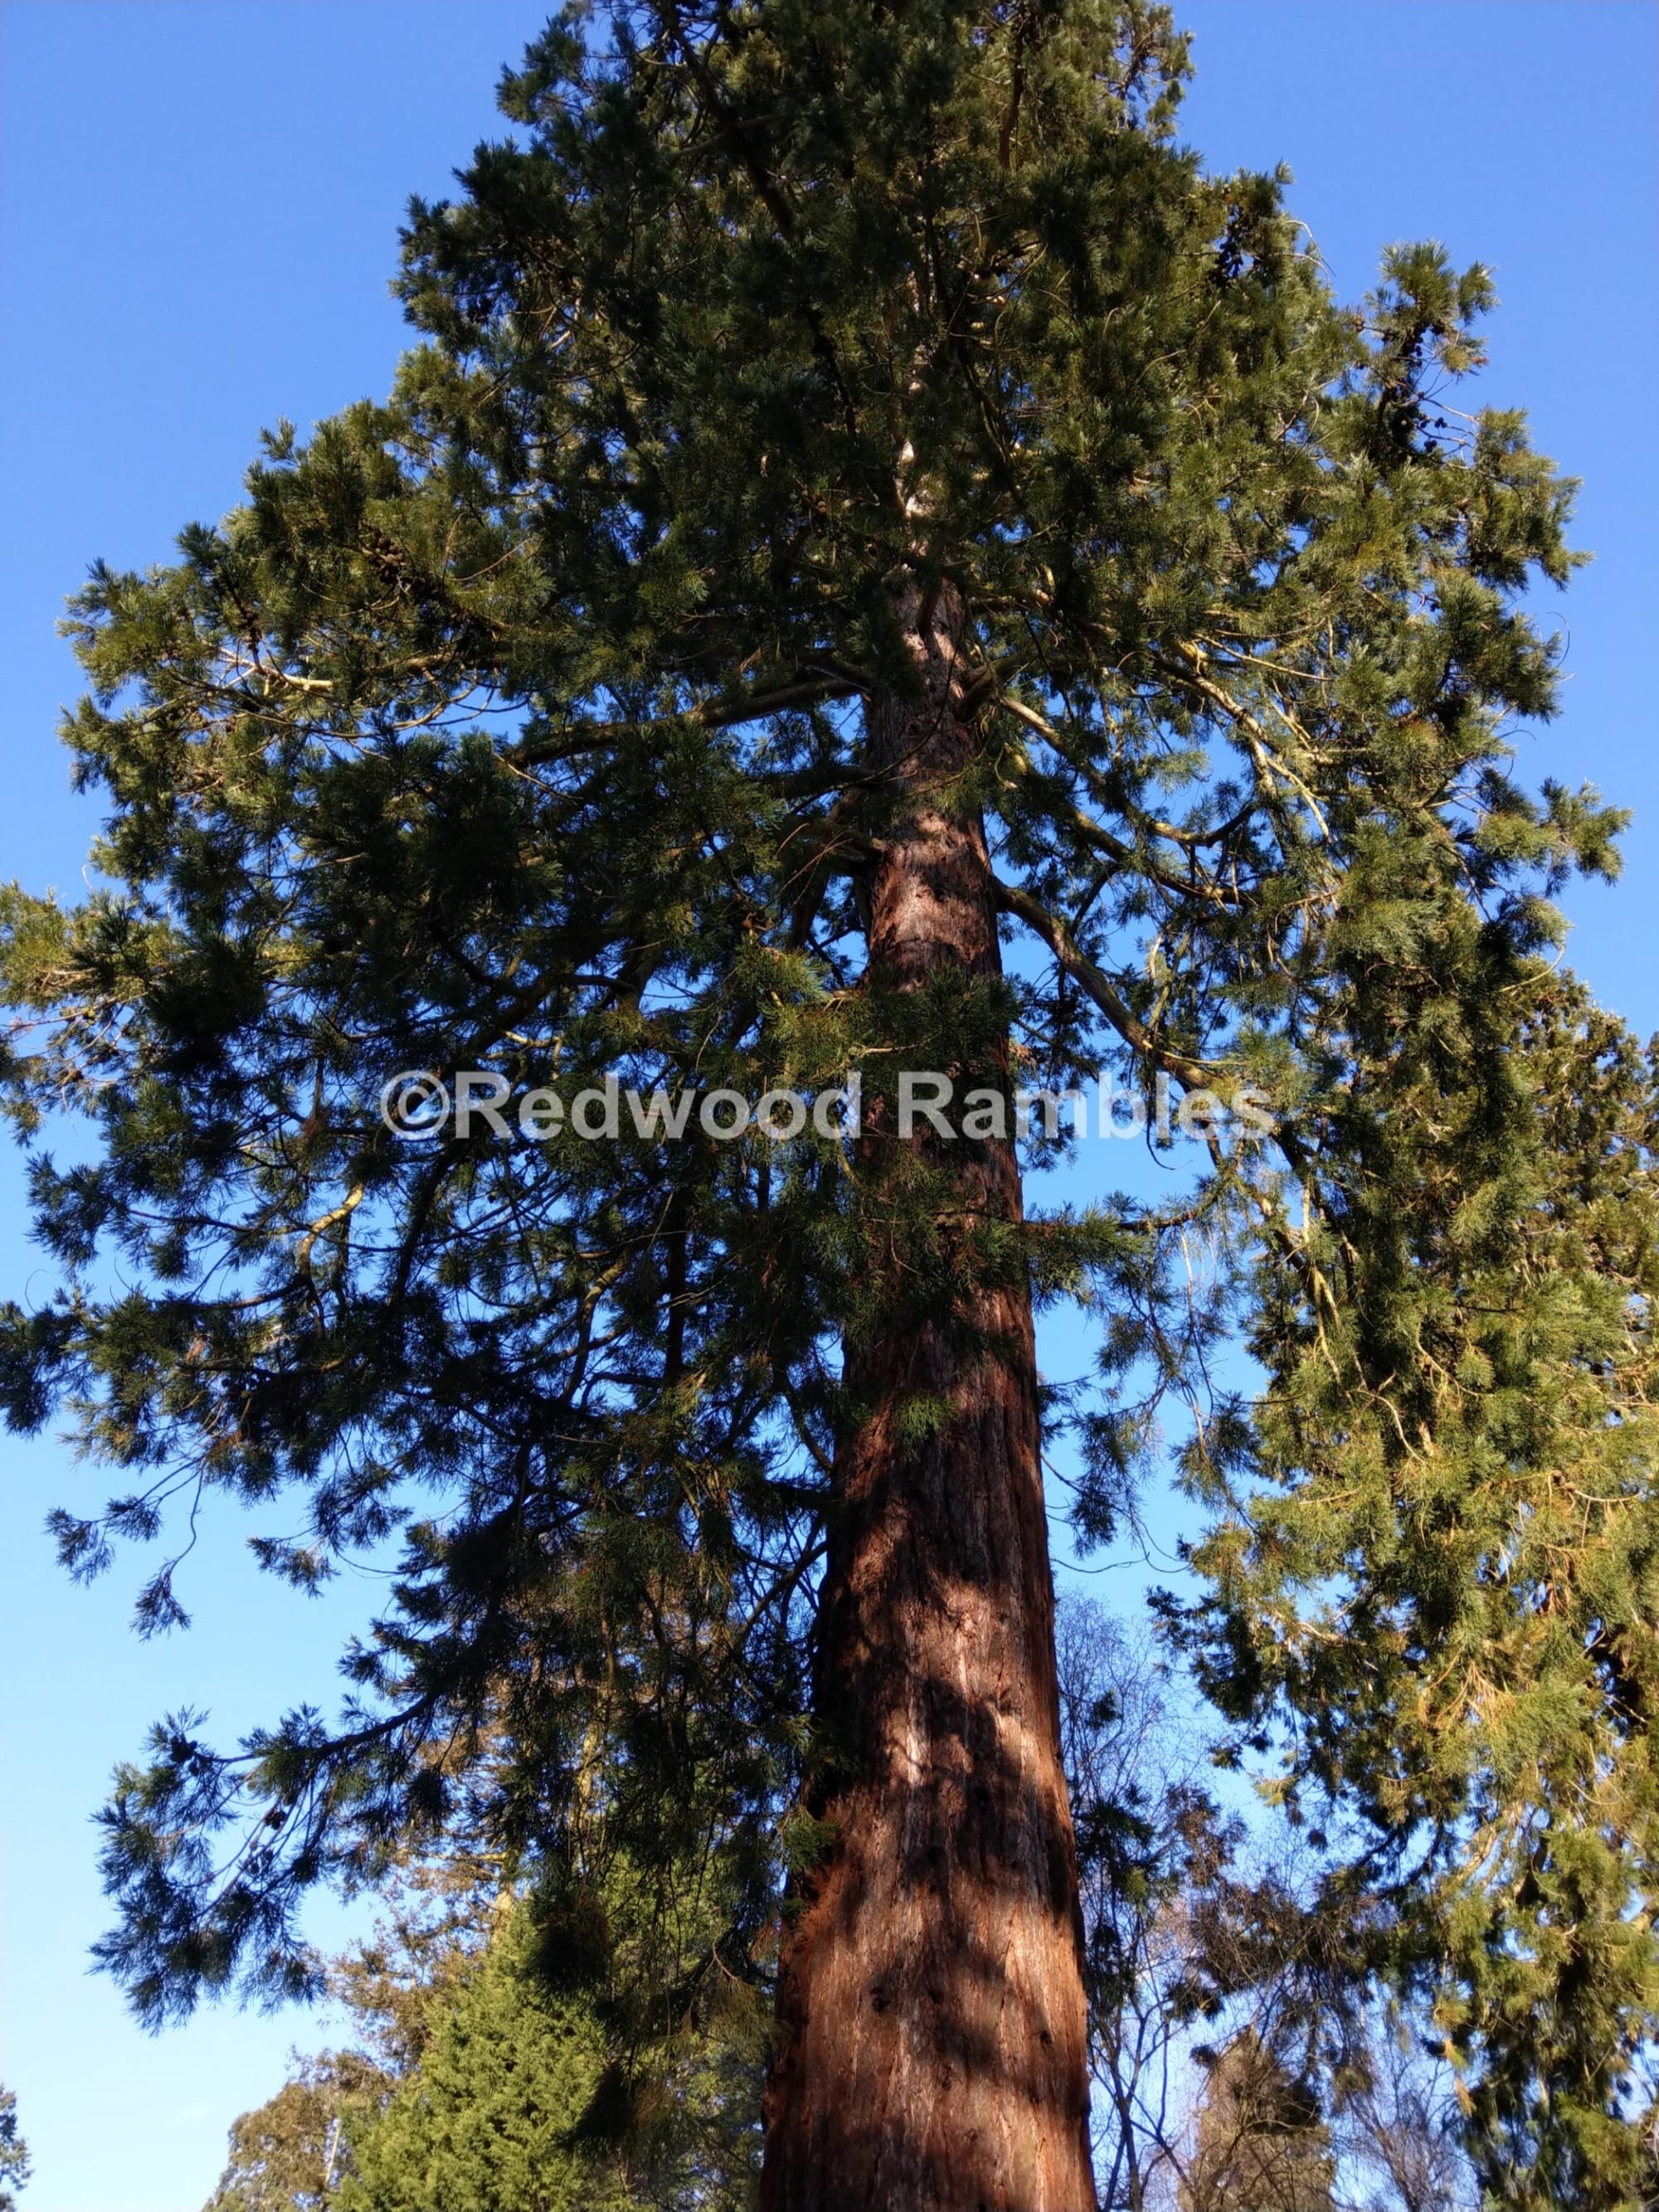 Giant Redwood Tree Facts